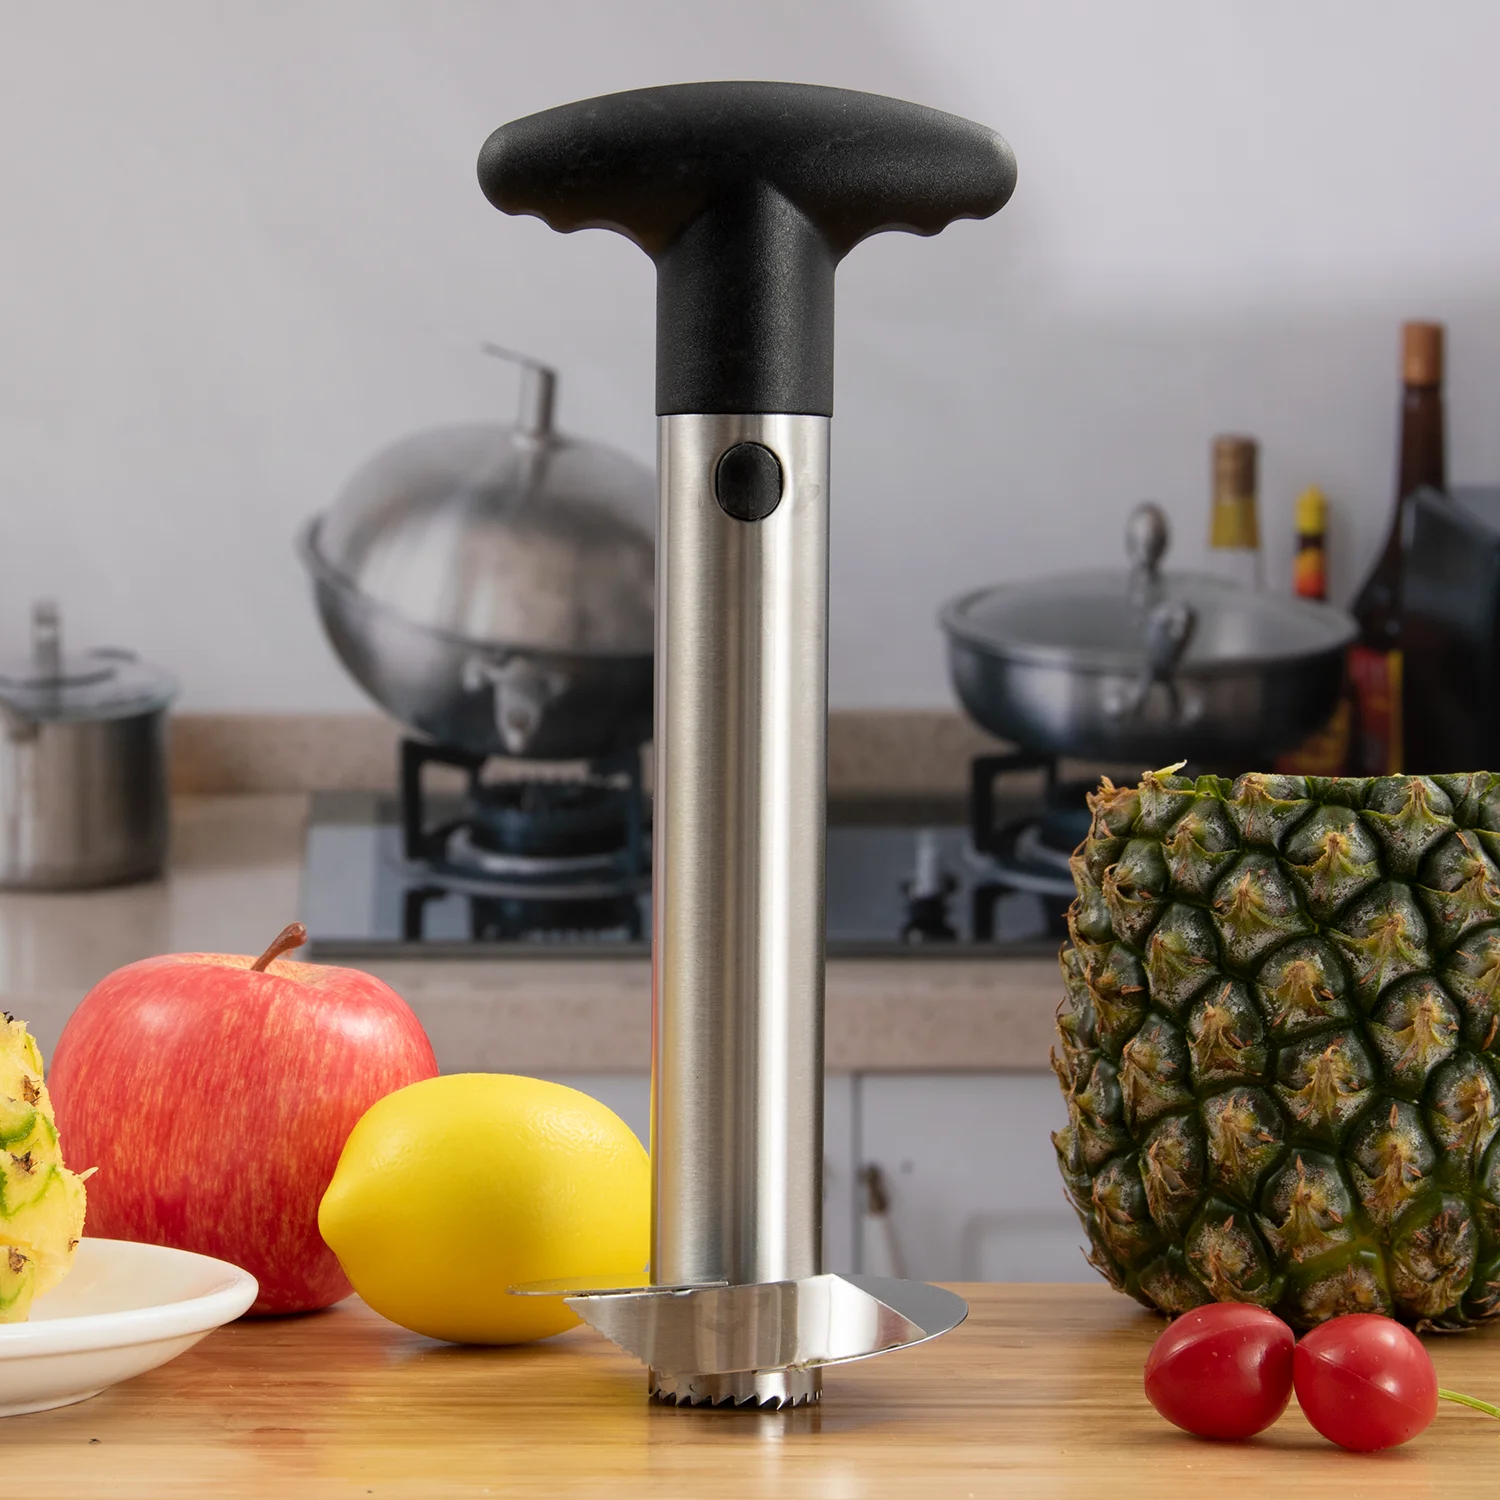 High Quality Kitchen Gadgets Stainless Steel Pineapple Peeler Pineapple Corer And Slicer Cutter